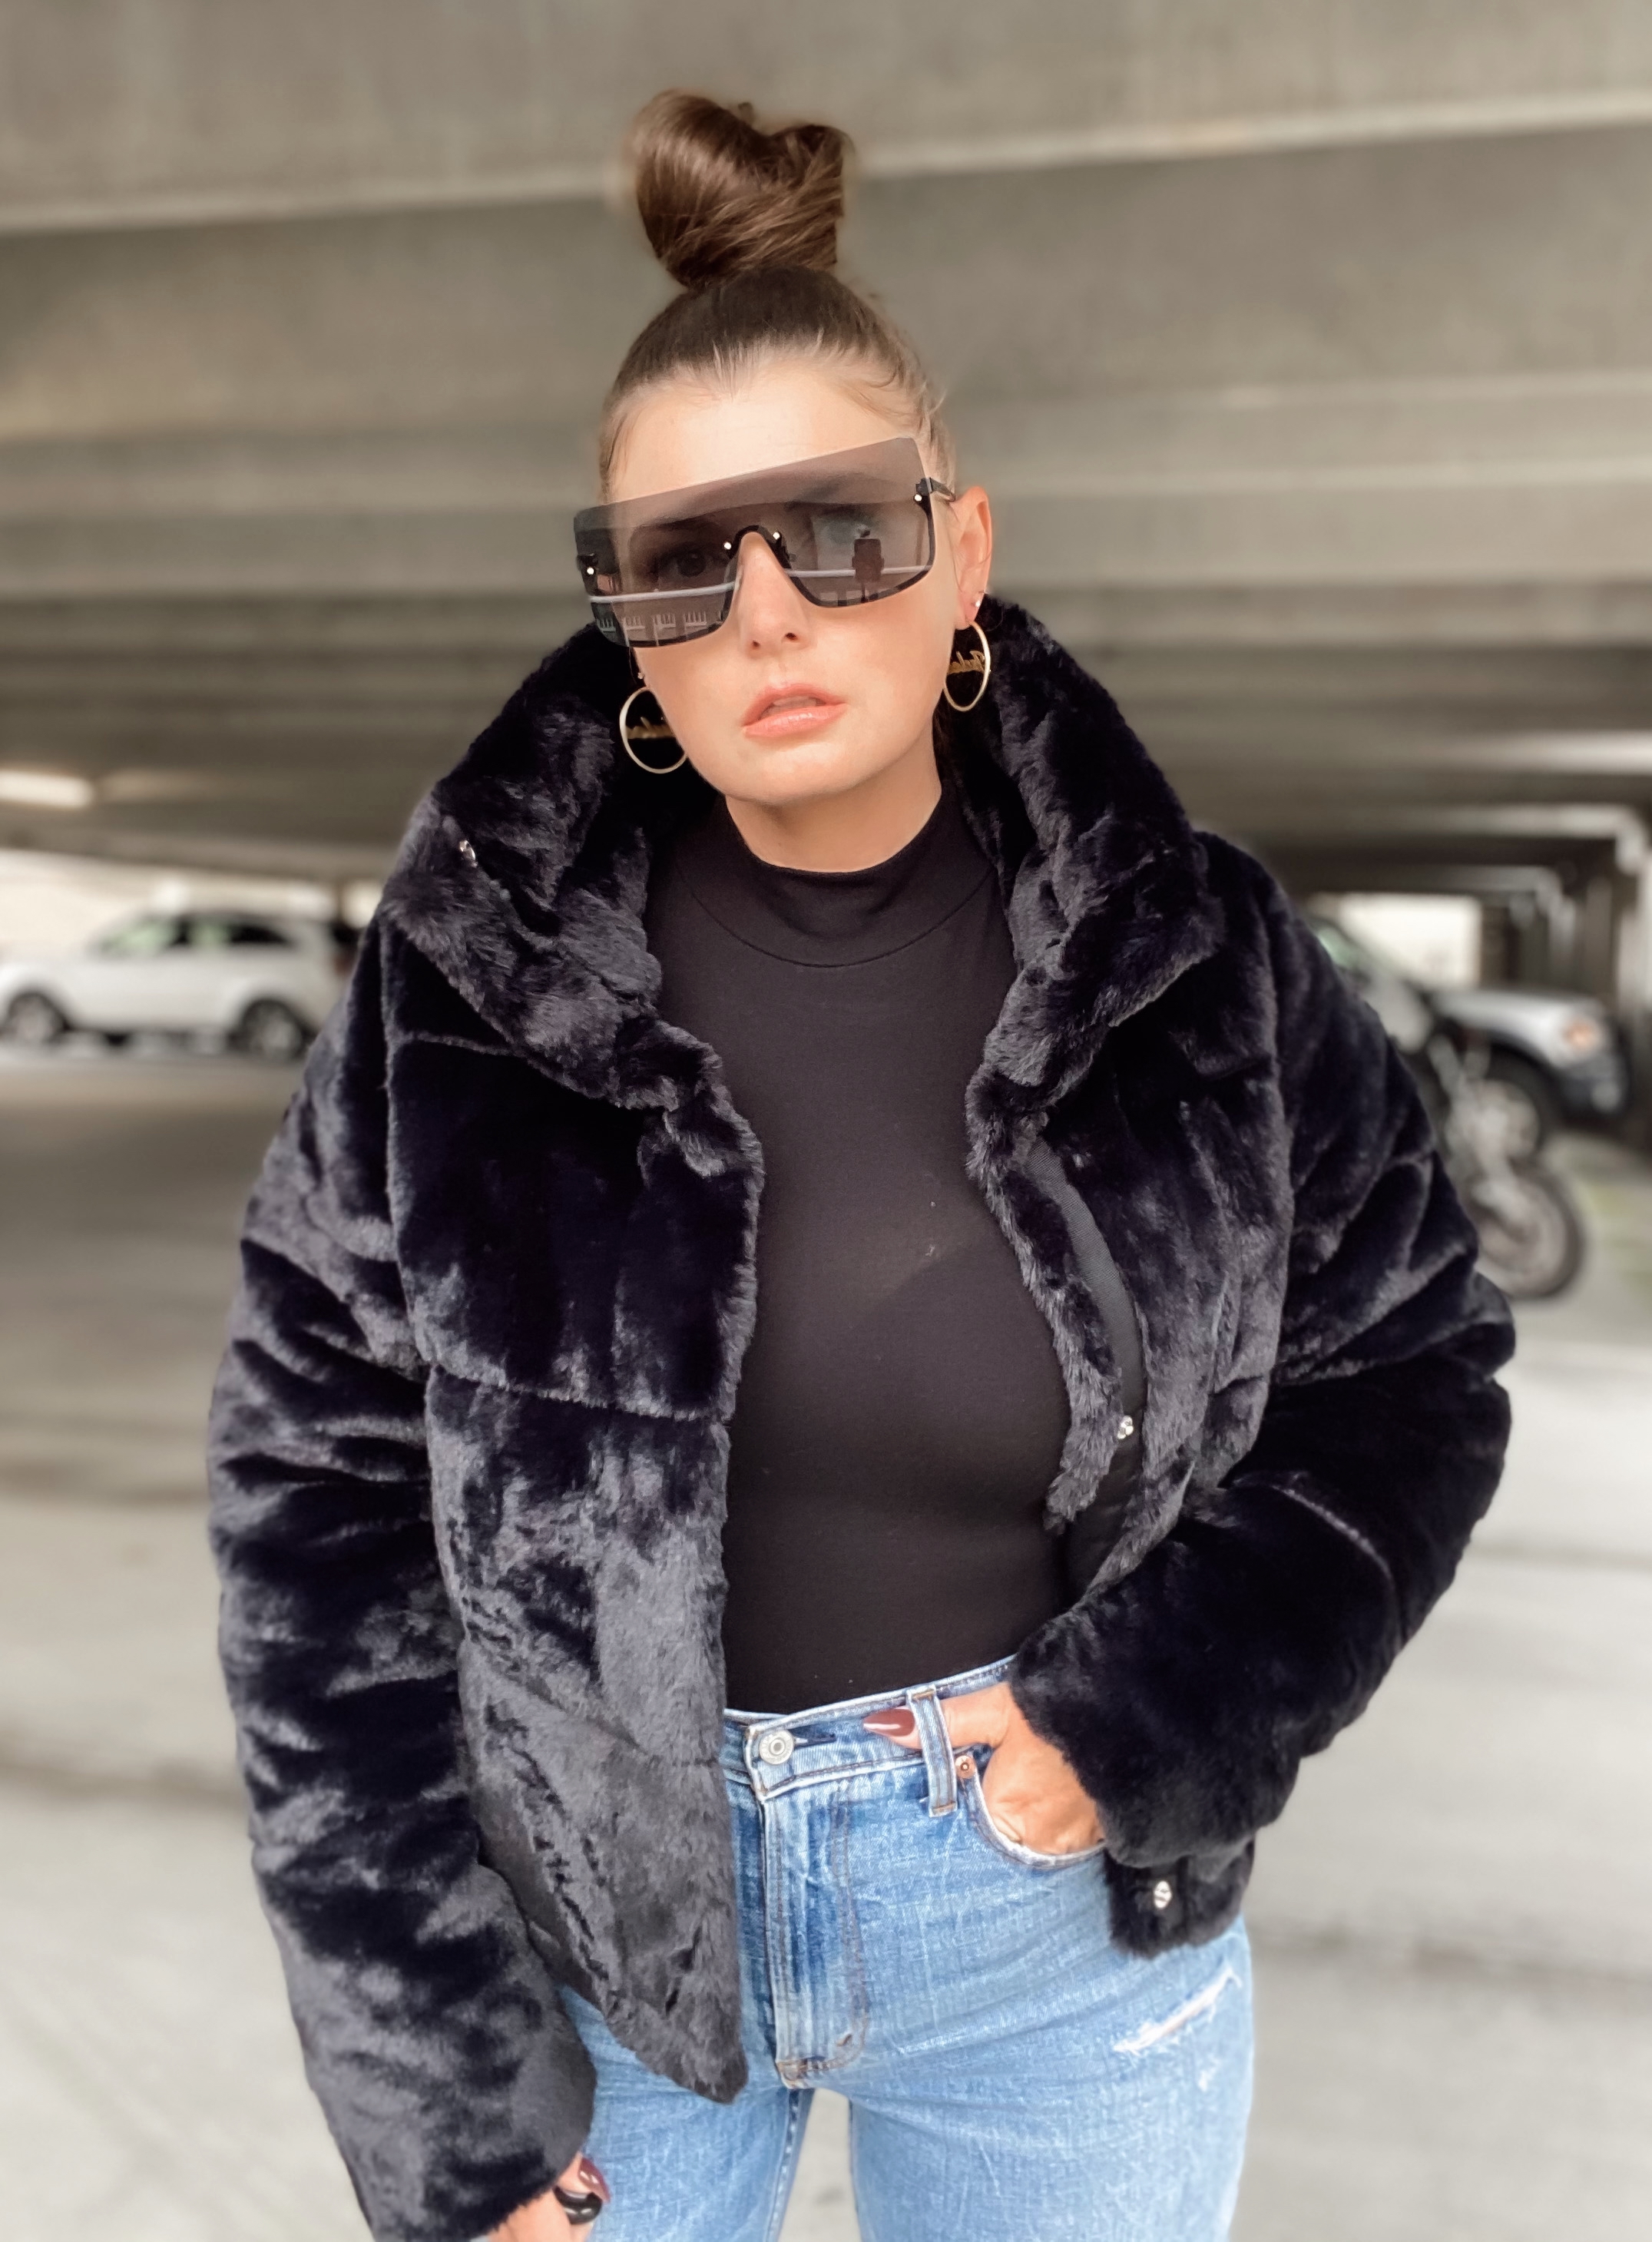 5 FALL OUTFIT IDEAS  TOP 5 FROM TIKTOK & IG REELS